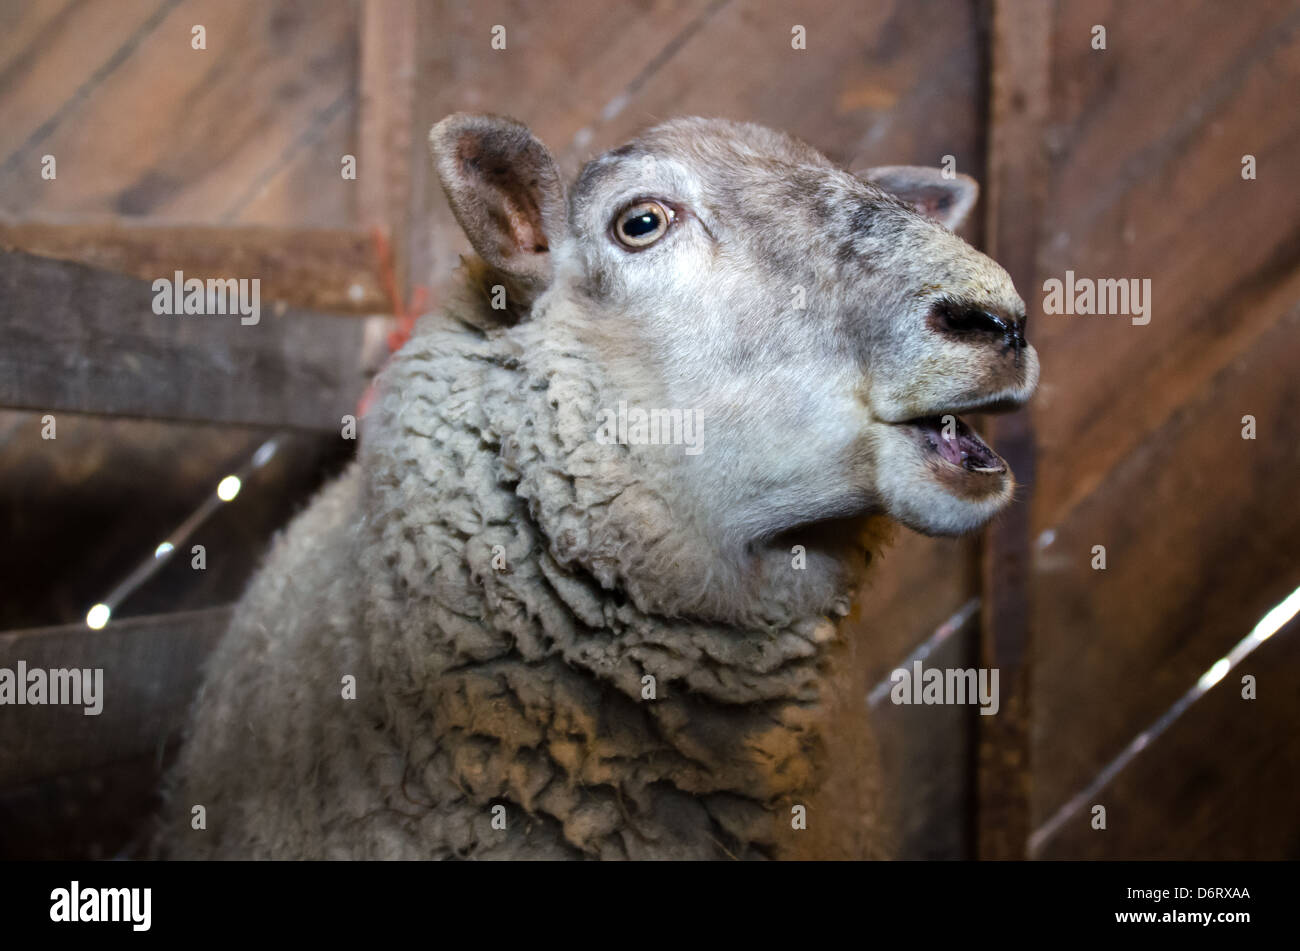 Ewe / female sheep with open mouth and odd expression. Stock Photo